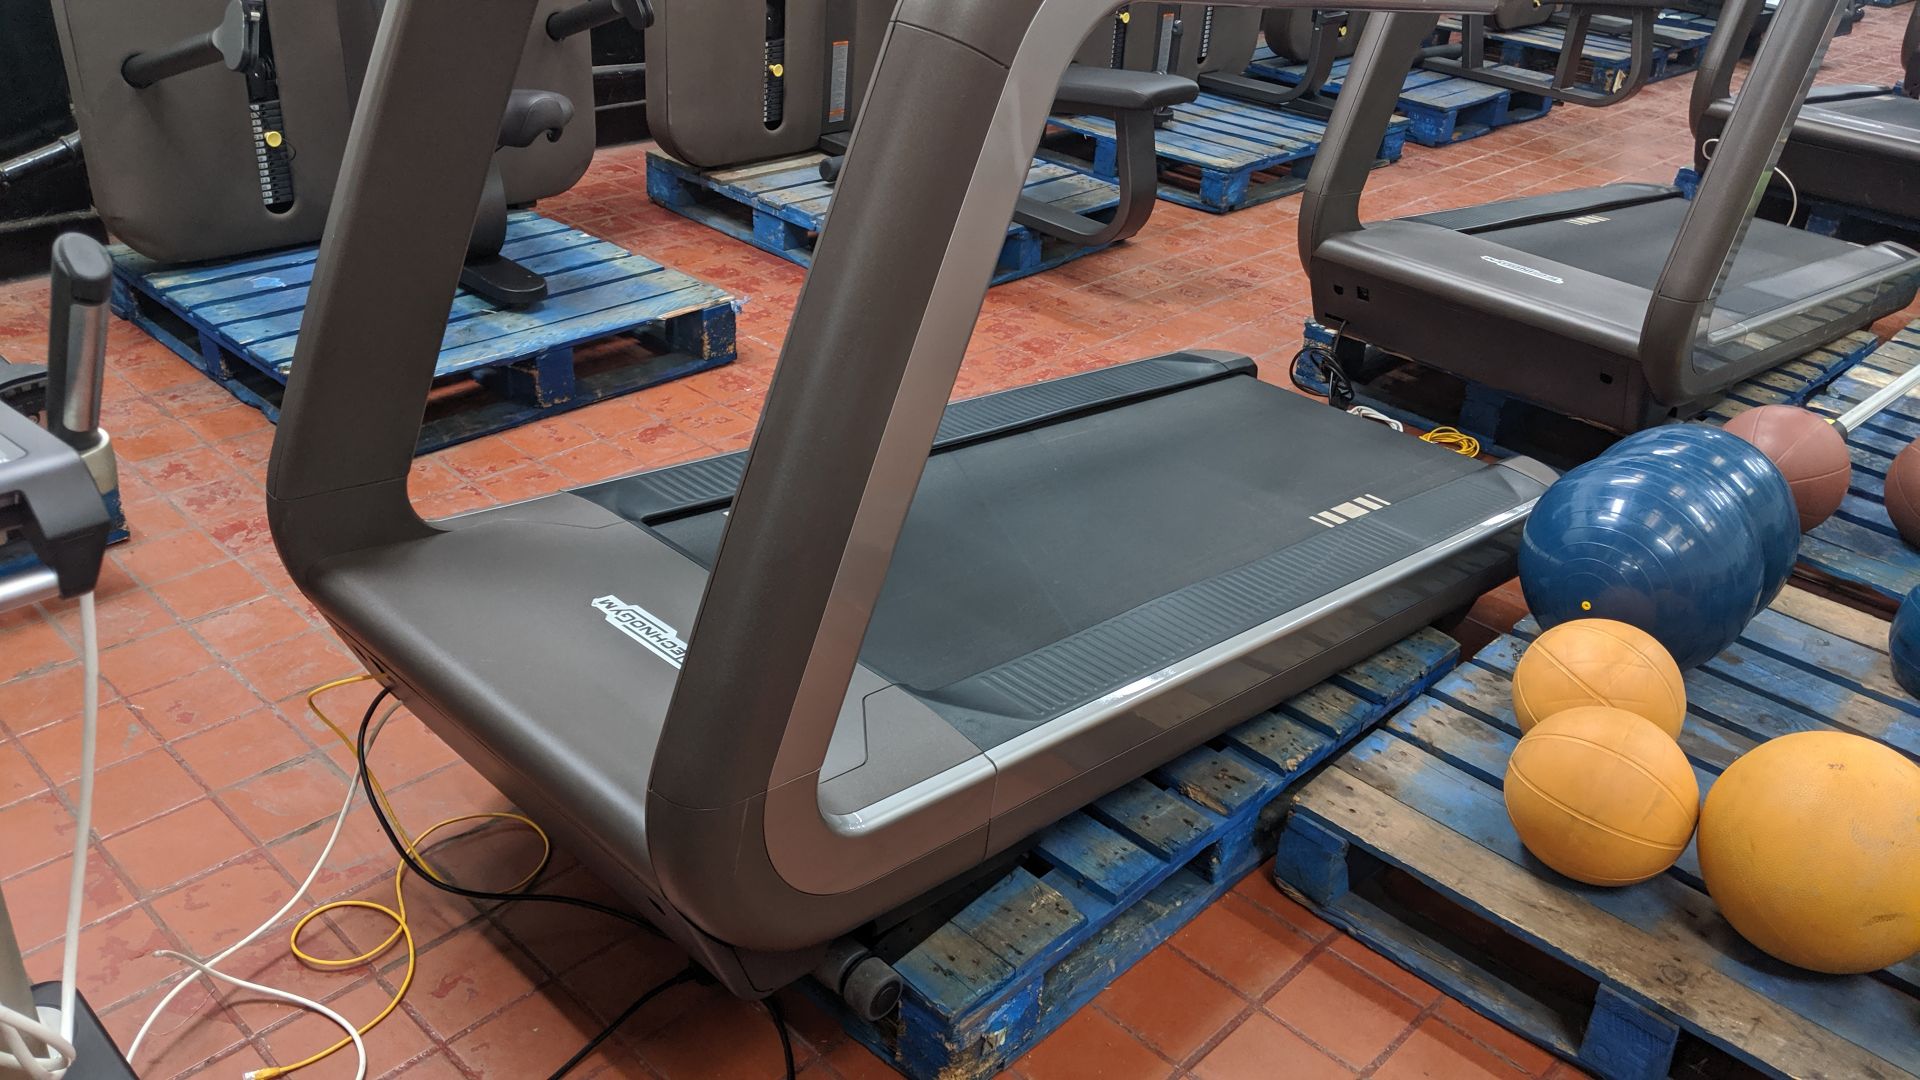 Technogym Artis treadmill Purchased new in 2016 - refurbished/recommissioned by Technogym - please - Image 13 of 16